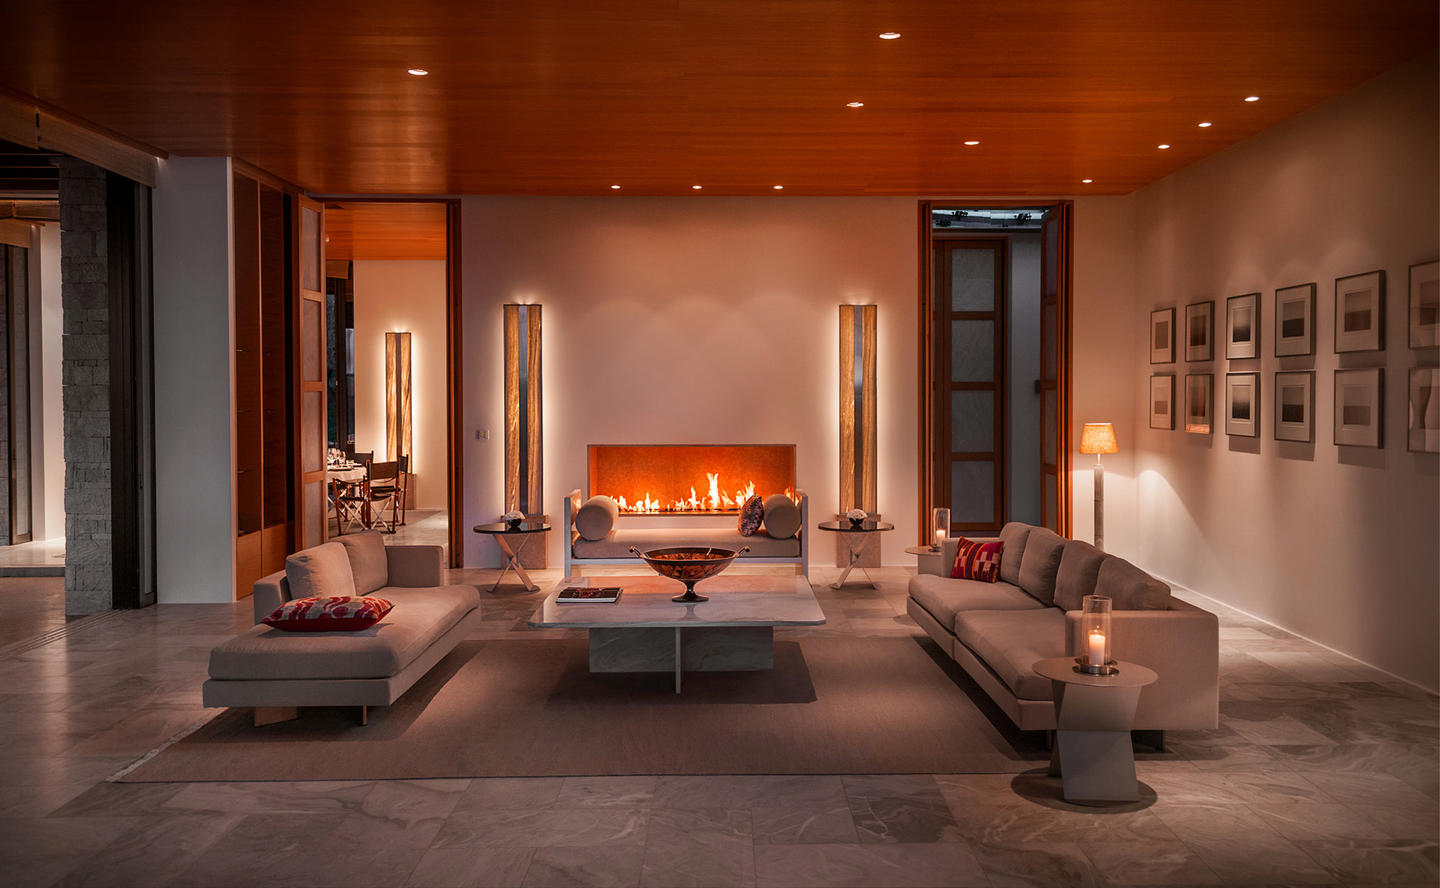 Living Area at Night with Fireplace, Four-Bedroom Villa - Amanzoe, Greece